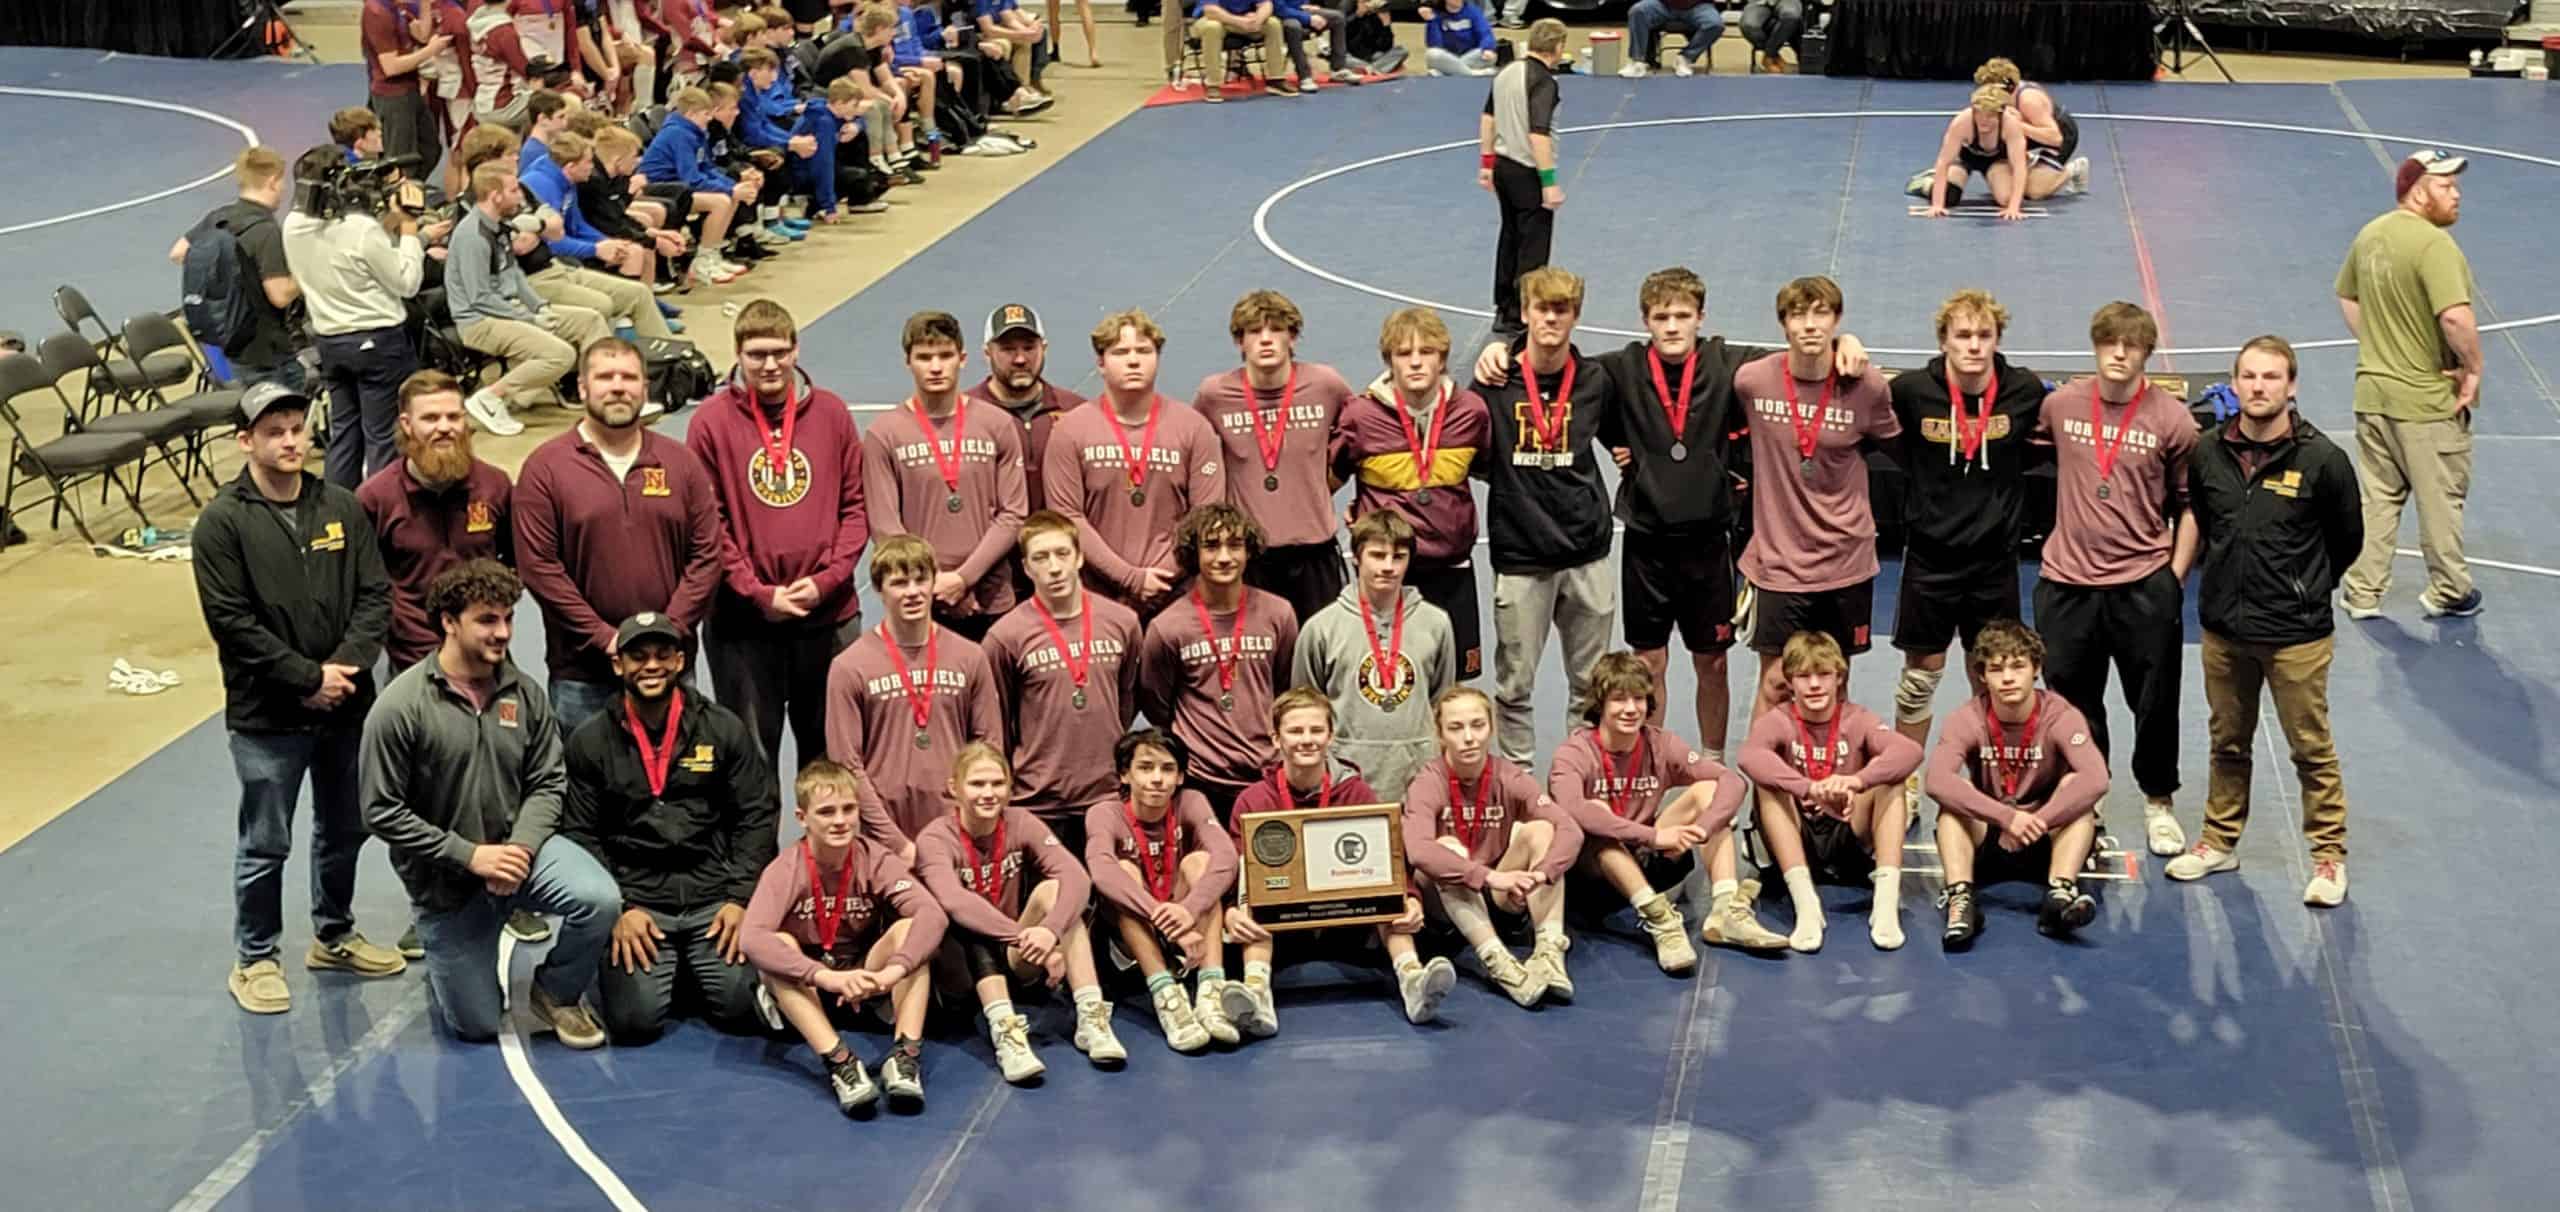 Northfield lost 49-7 in their section semifinals matchup to Albert Lea; missing out on the state team tournament.